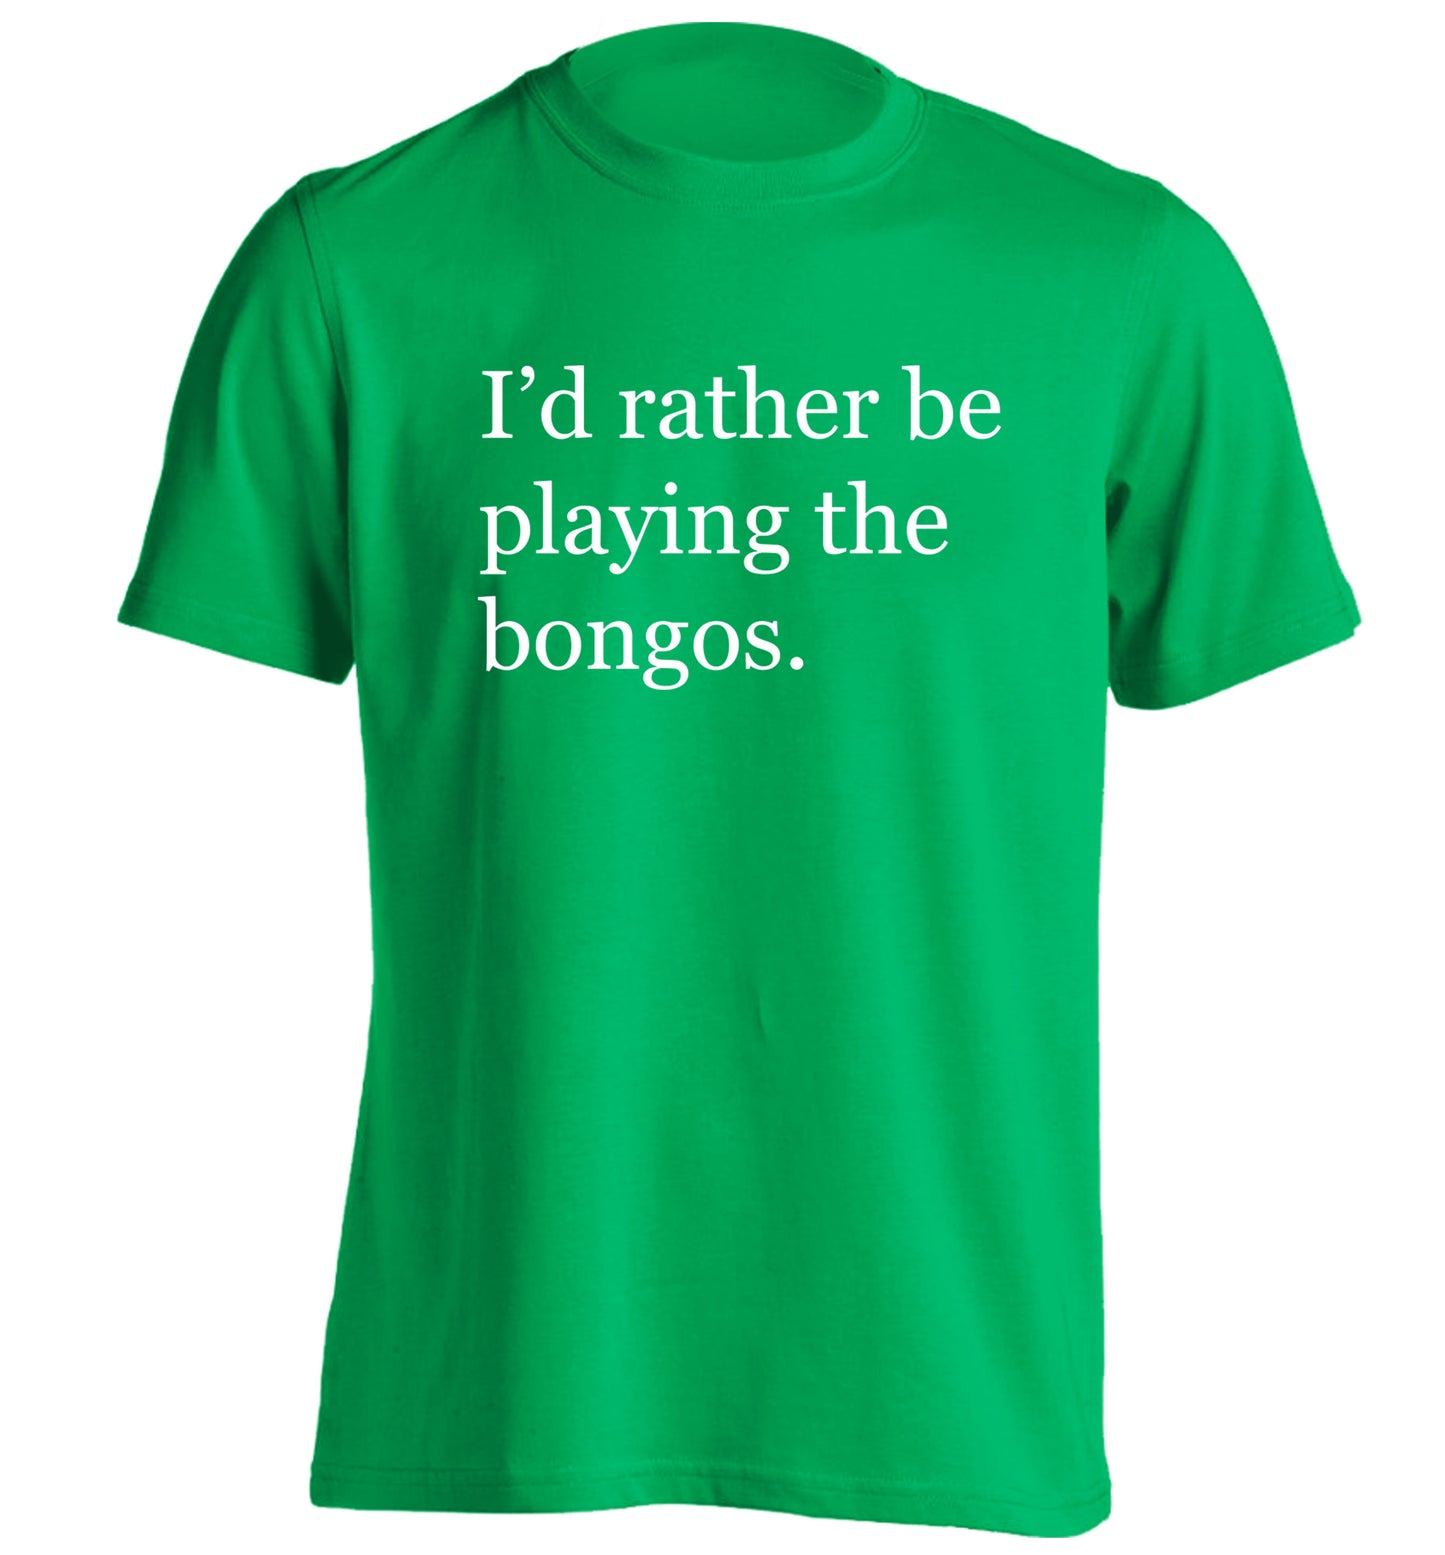 I'd rather be playing the bongos adults unisexgreen Tshirt 2XL